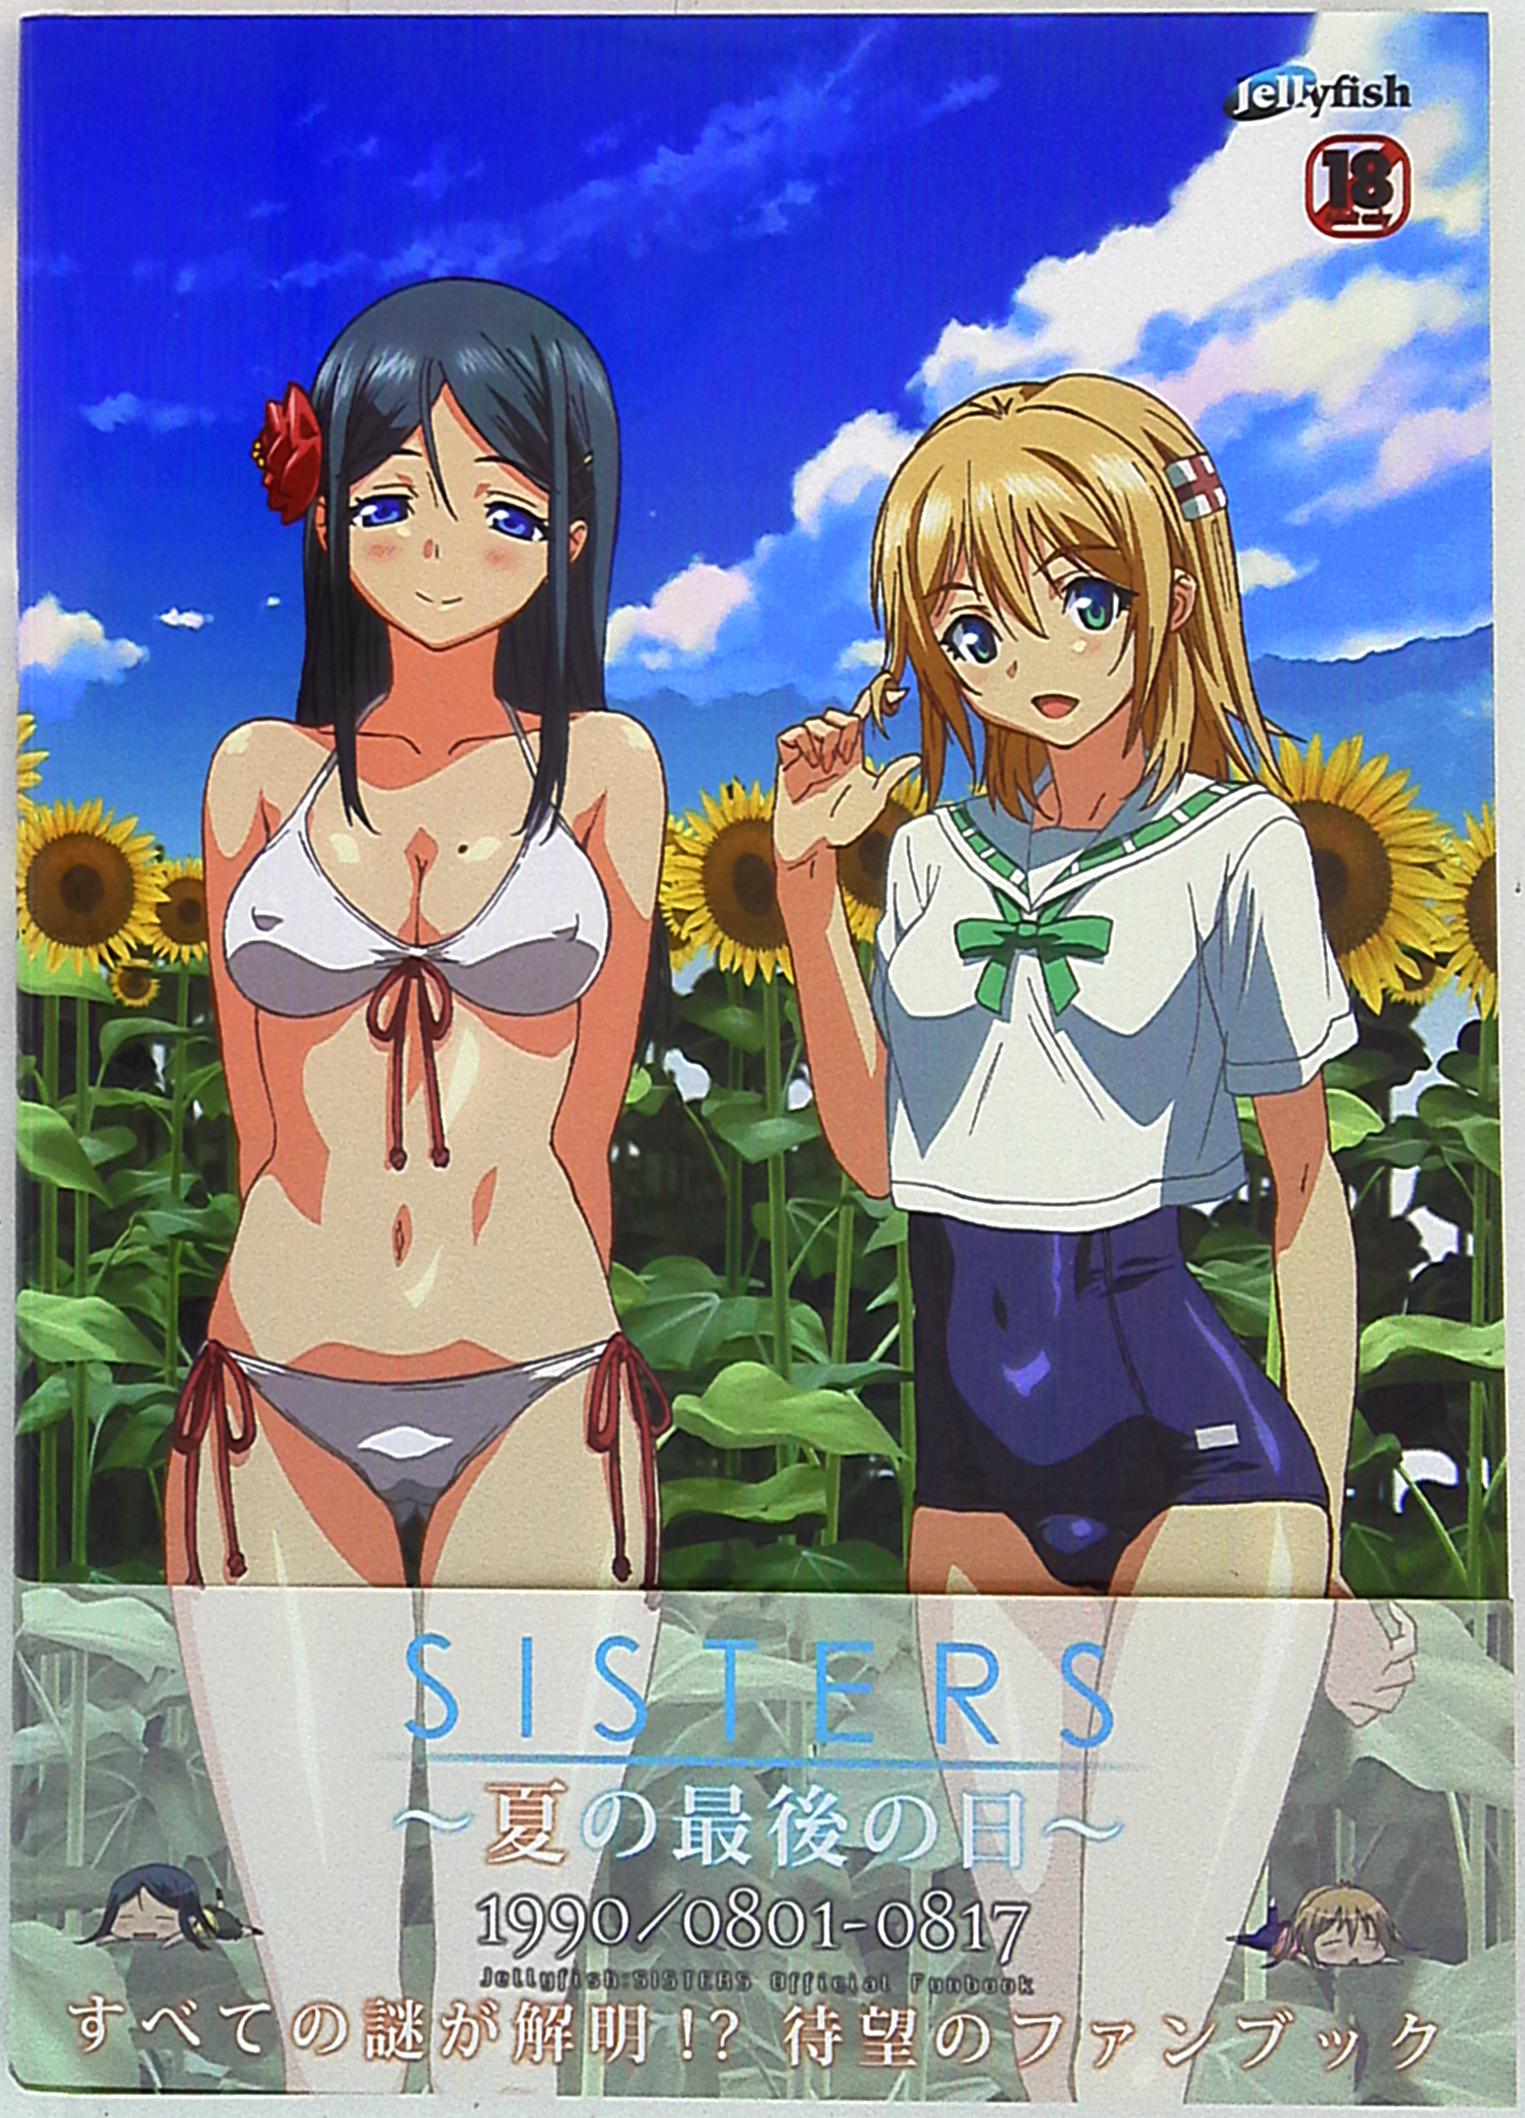 You can find Jellyfish SISTERS - Last day of summer - Official fan book (wi...